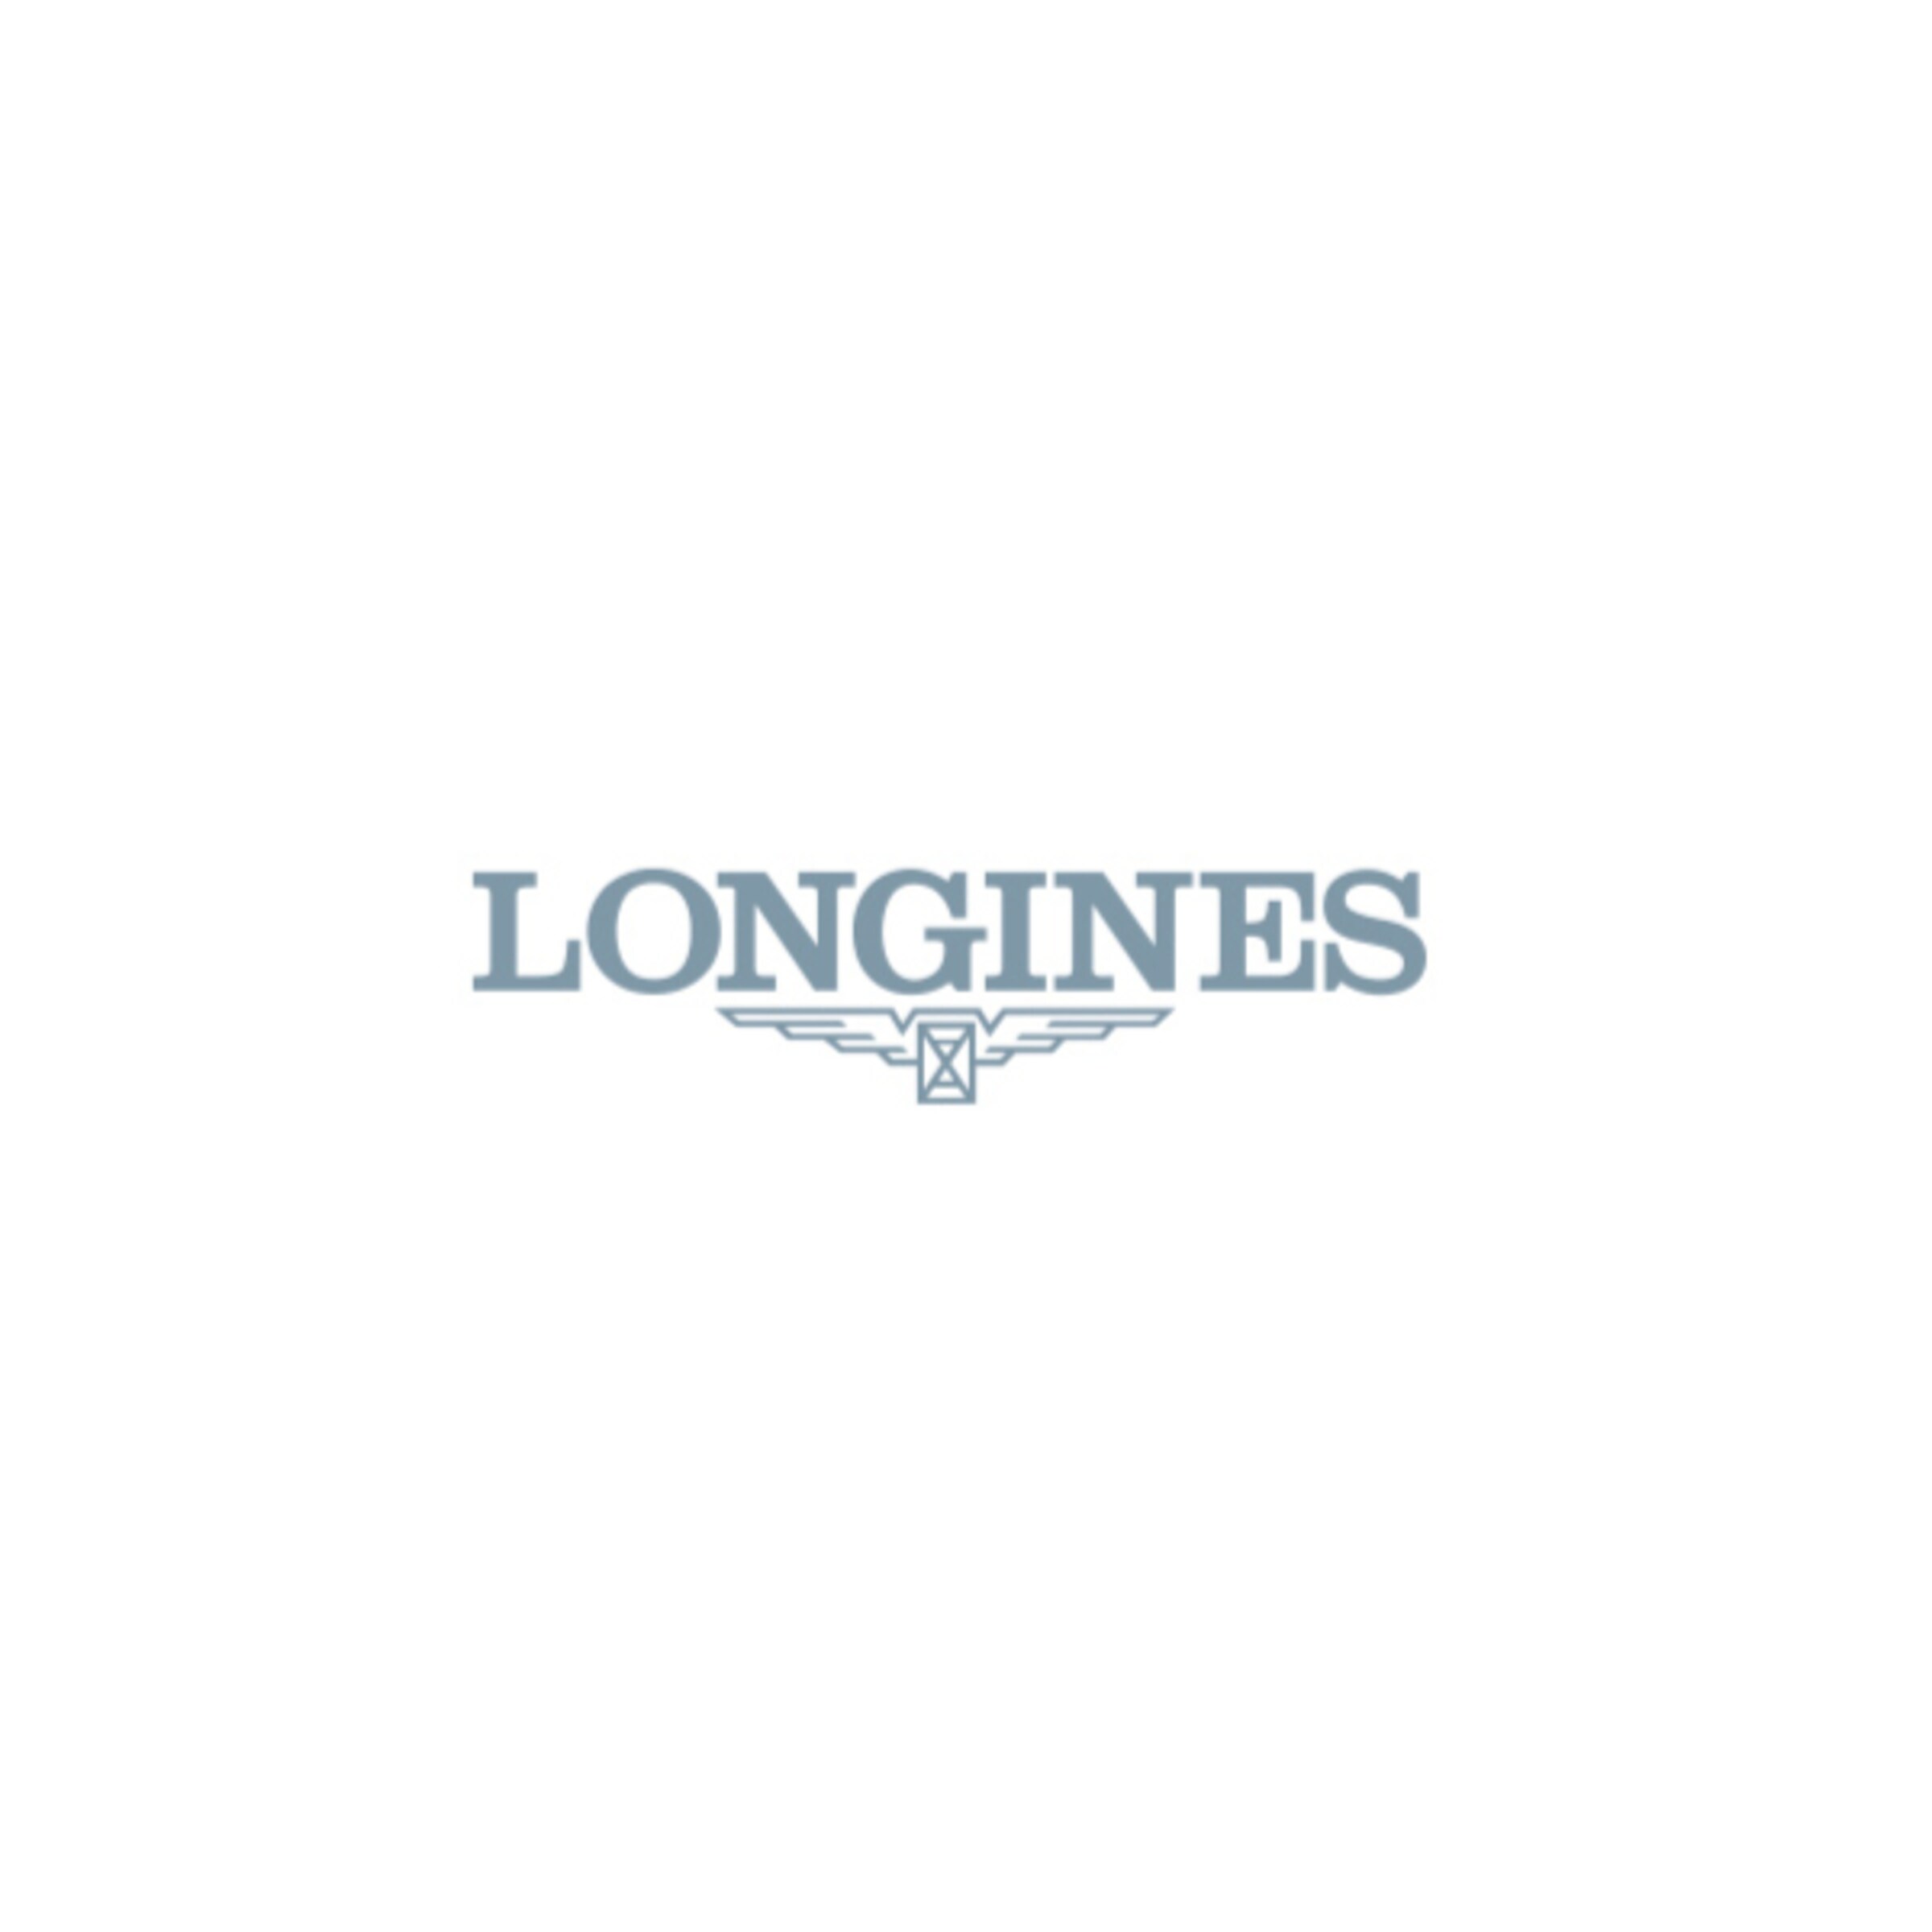 Longines THE LONGINES LEGEND DIVER WATCH Automatic Stainless steel Watch - L3.774.4.50.9